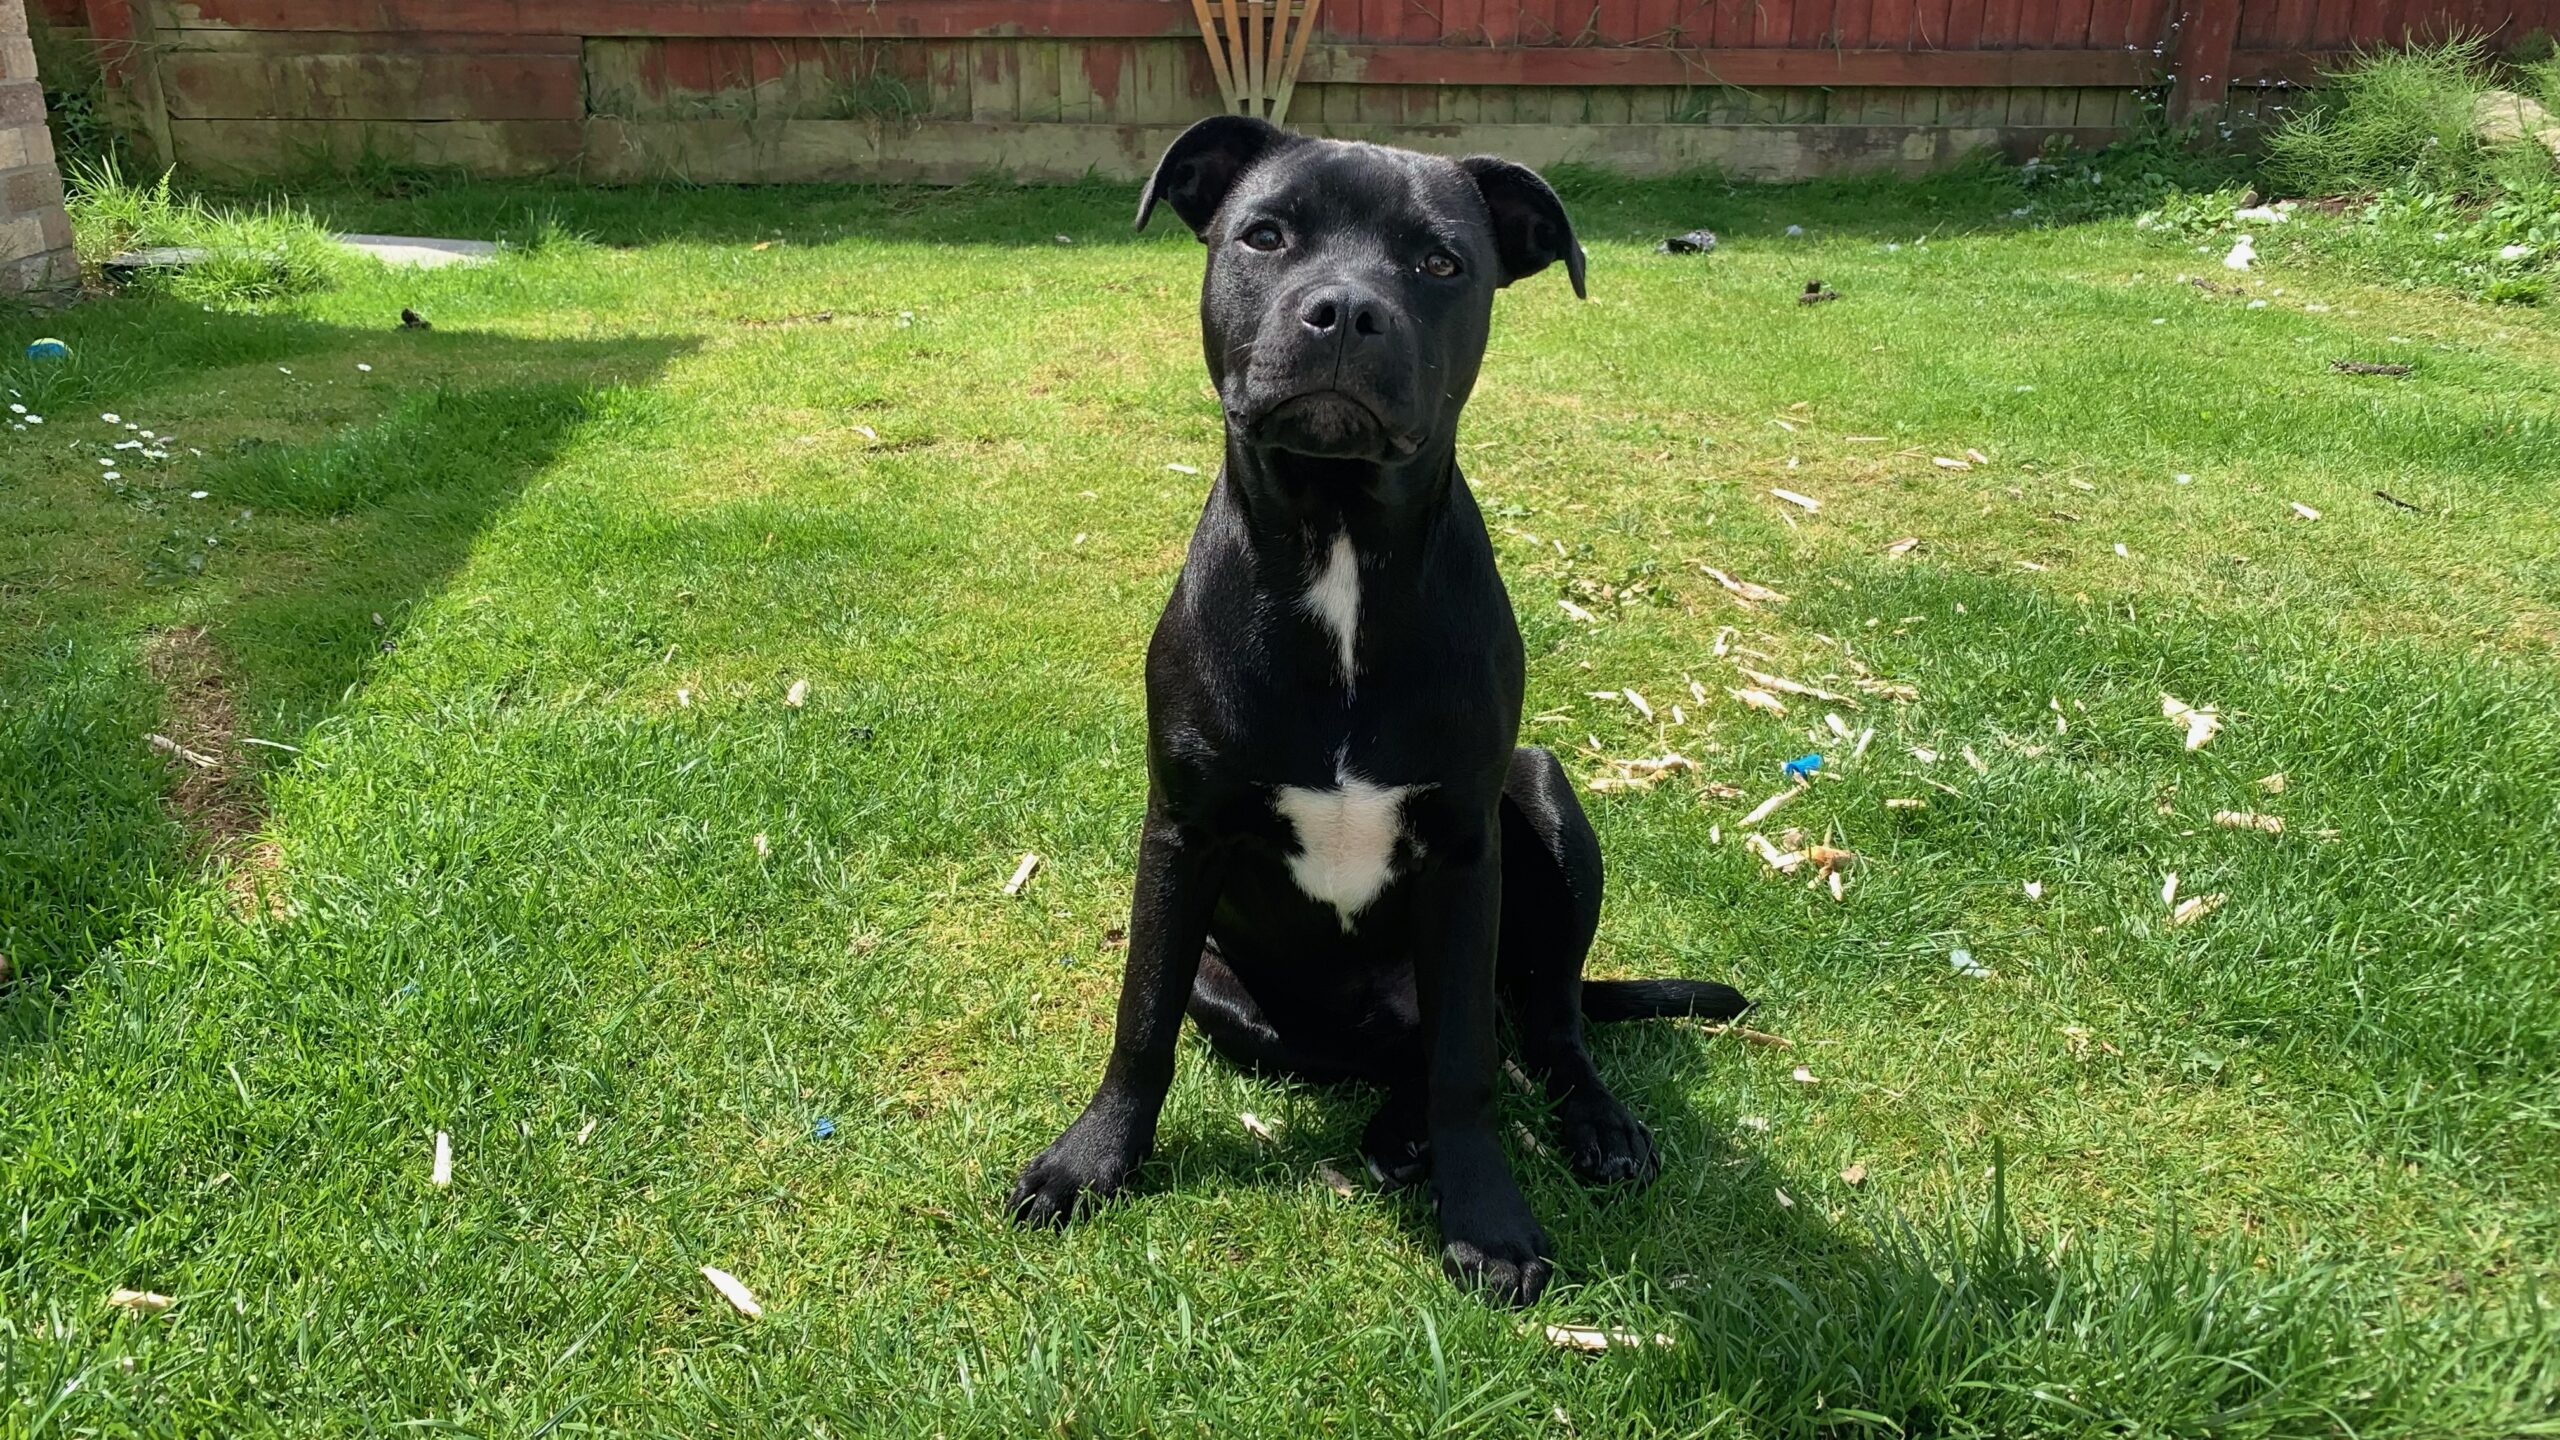 Baby Frank the Staffordshire Bull Terrier sits on the grass